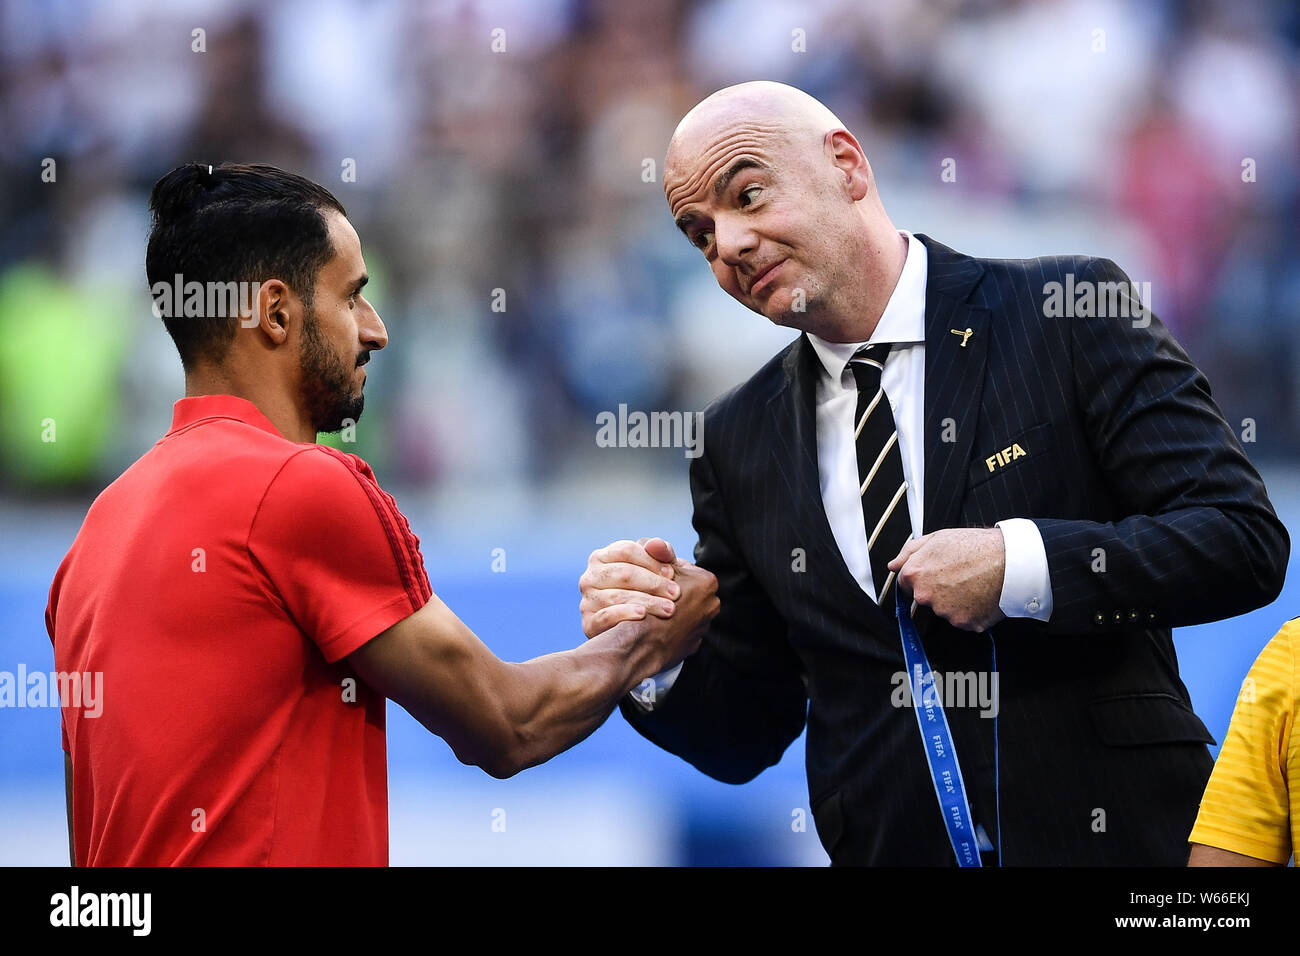 FIFA president Gianni Infantino, right, awards Nacer Chadli of Belgium after Belgium defeated England in their third place match during the 2018 FIFA Stock Photo